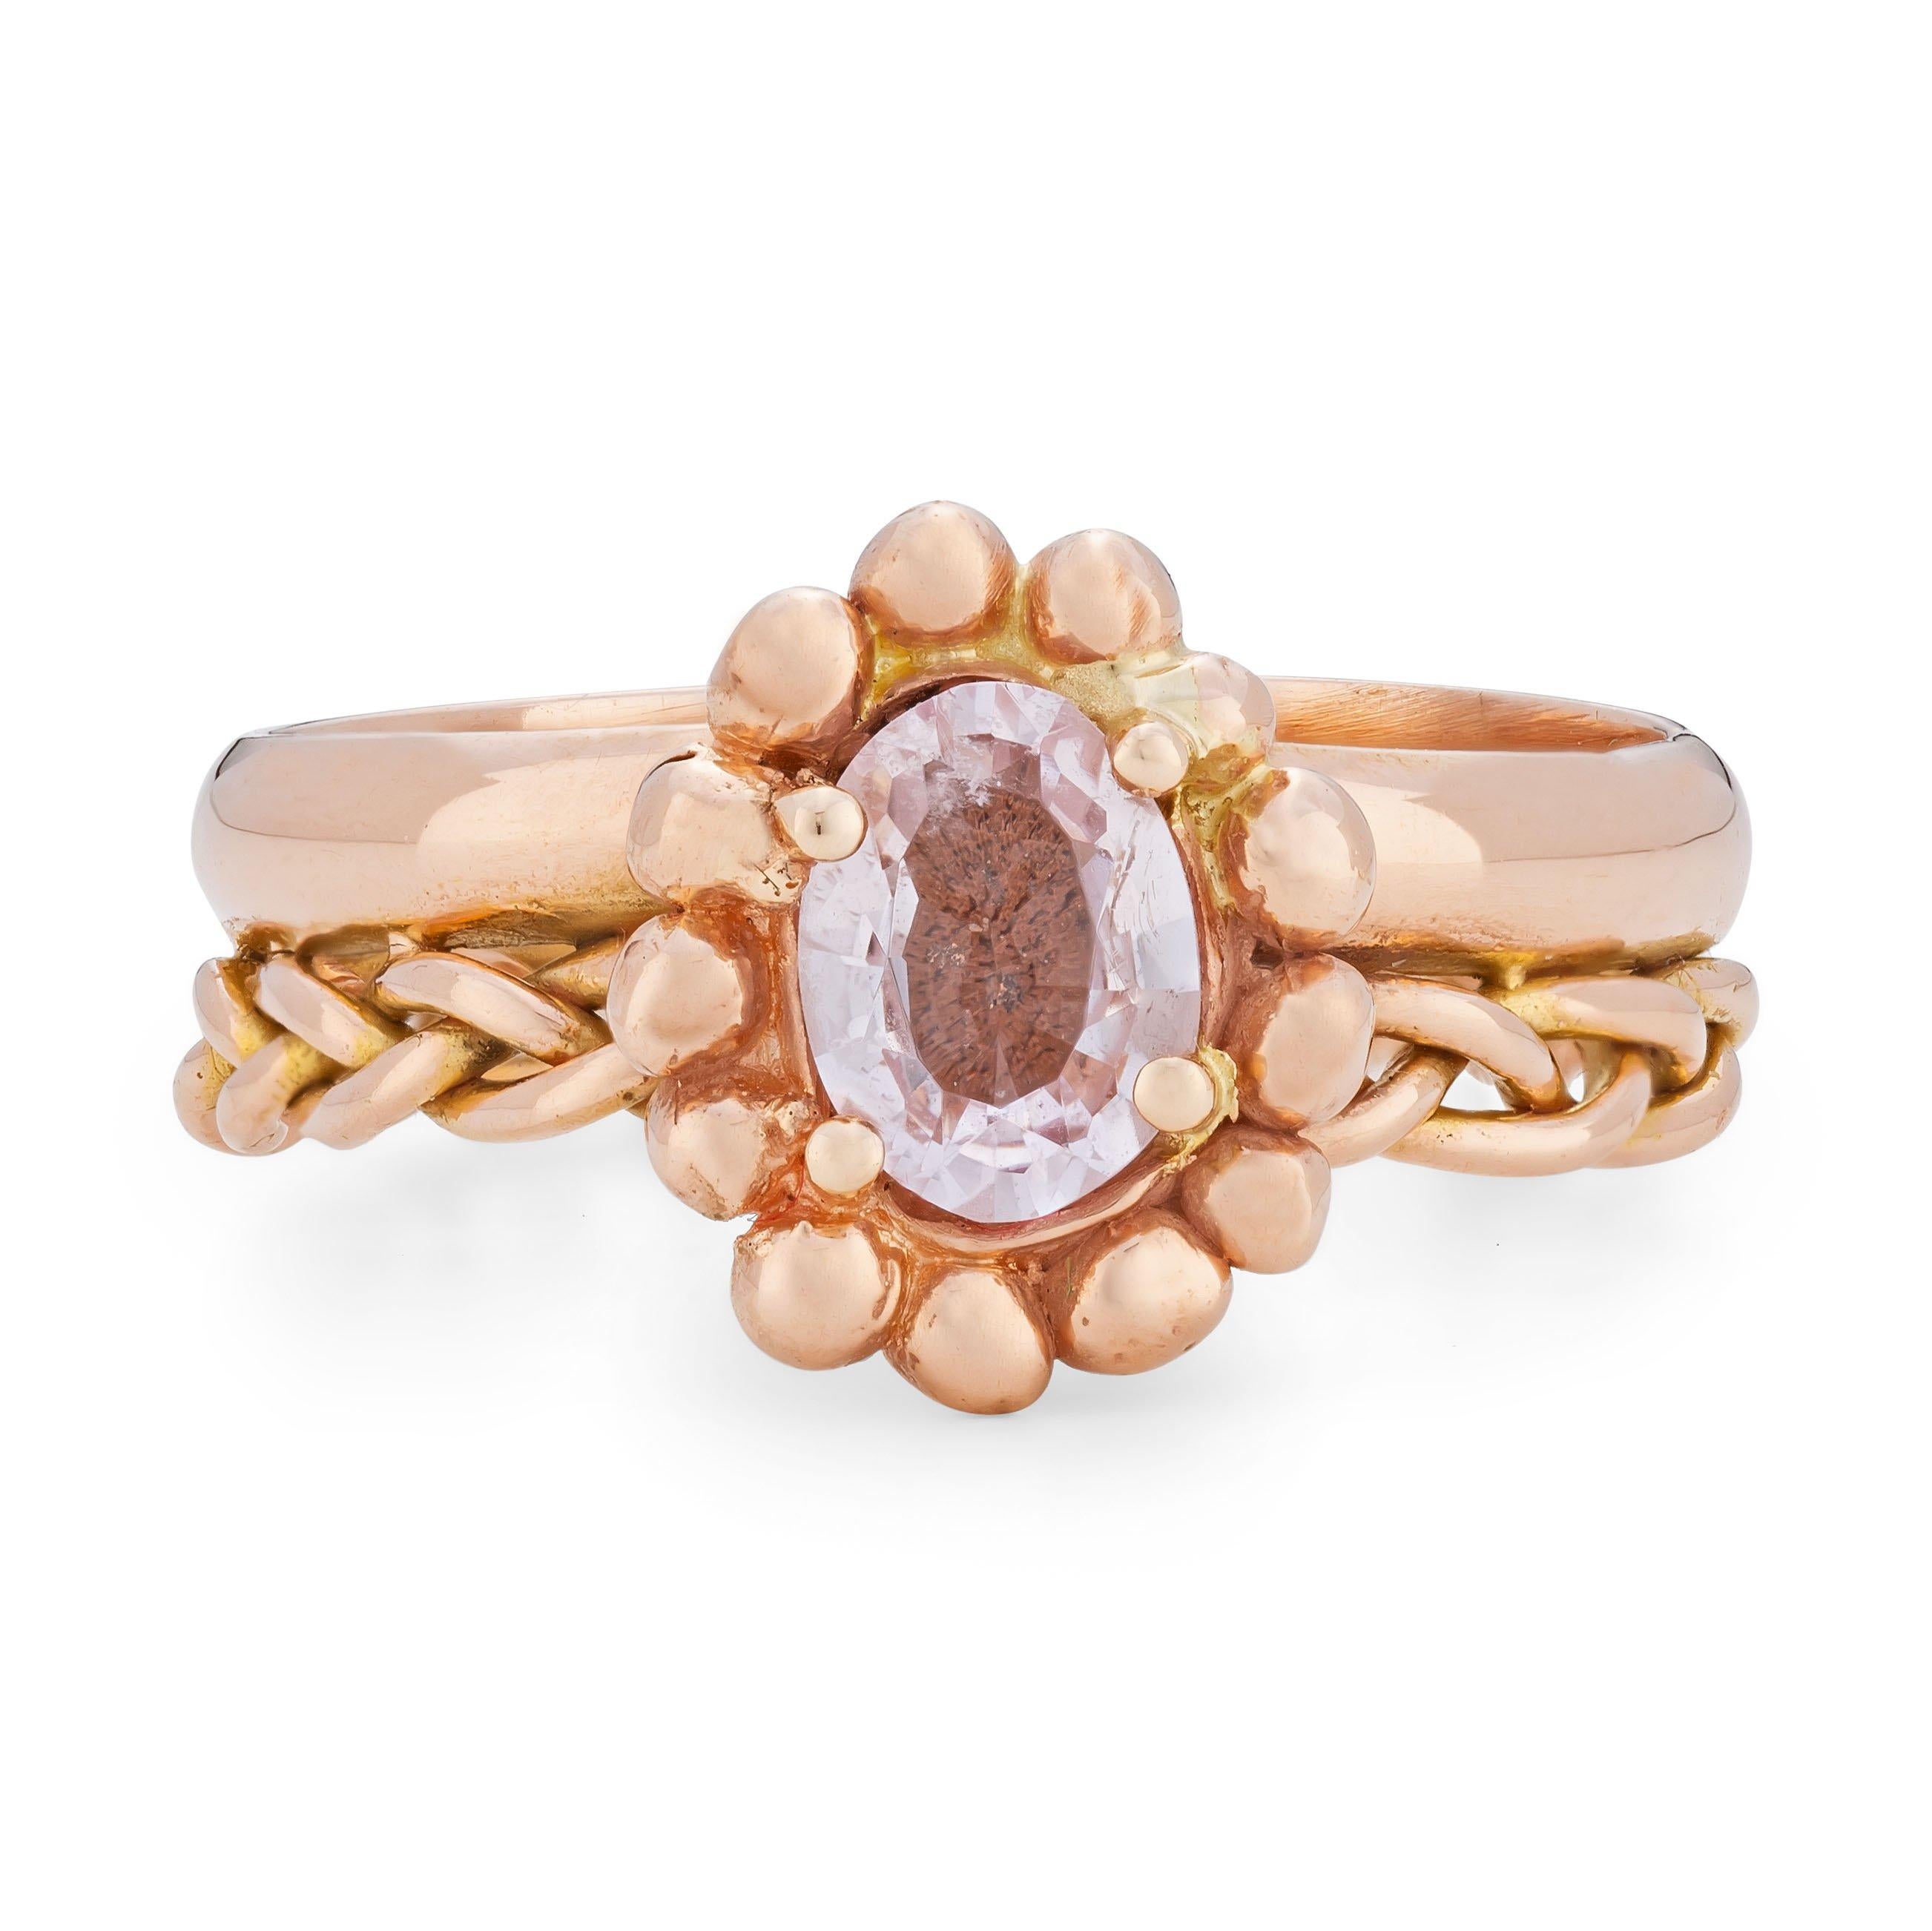 Albareum Ring, 18 Karat Rose Gold with Tourmaline stone. 
Handcrafted and individually cast in 18-karat solid yellow gold. Each item is made to order by Olivia and our small team of artisans in Italy. 
The bud of a flower represents the energy of